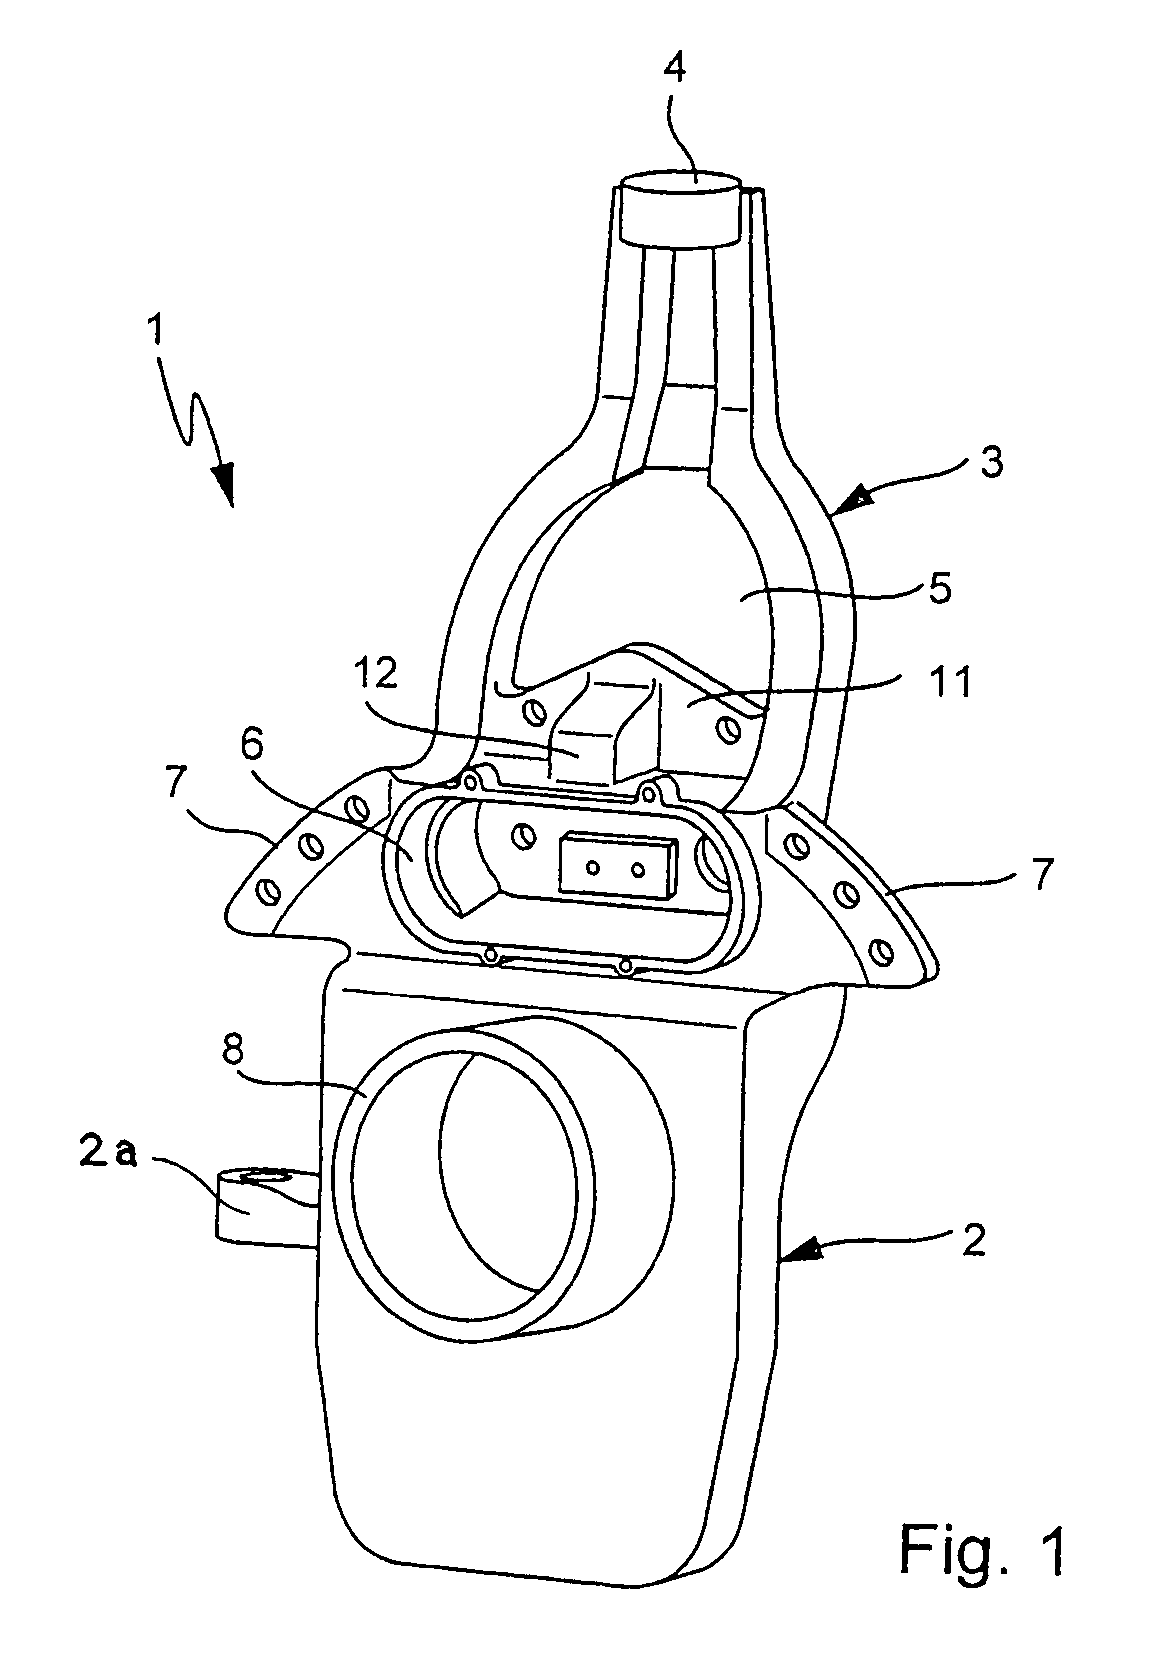 Wheel carrier unit comprising an integrated brake application unit